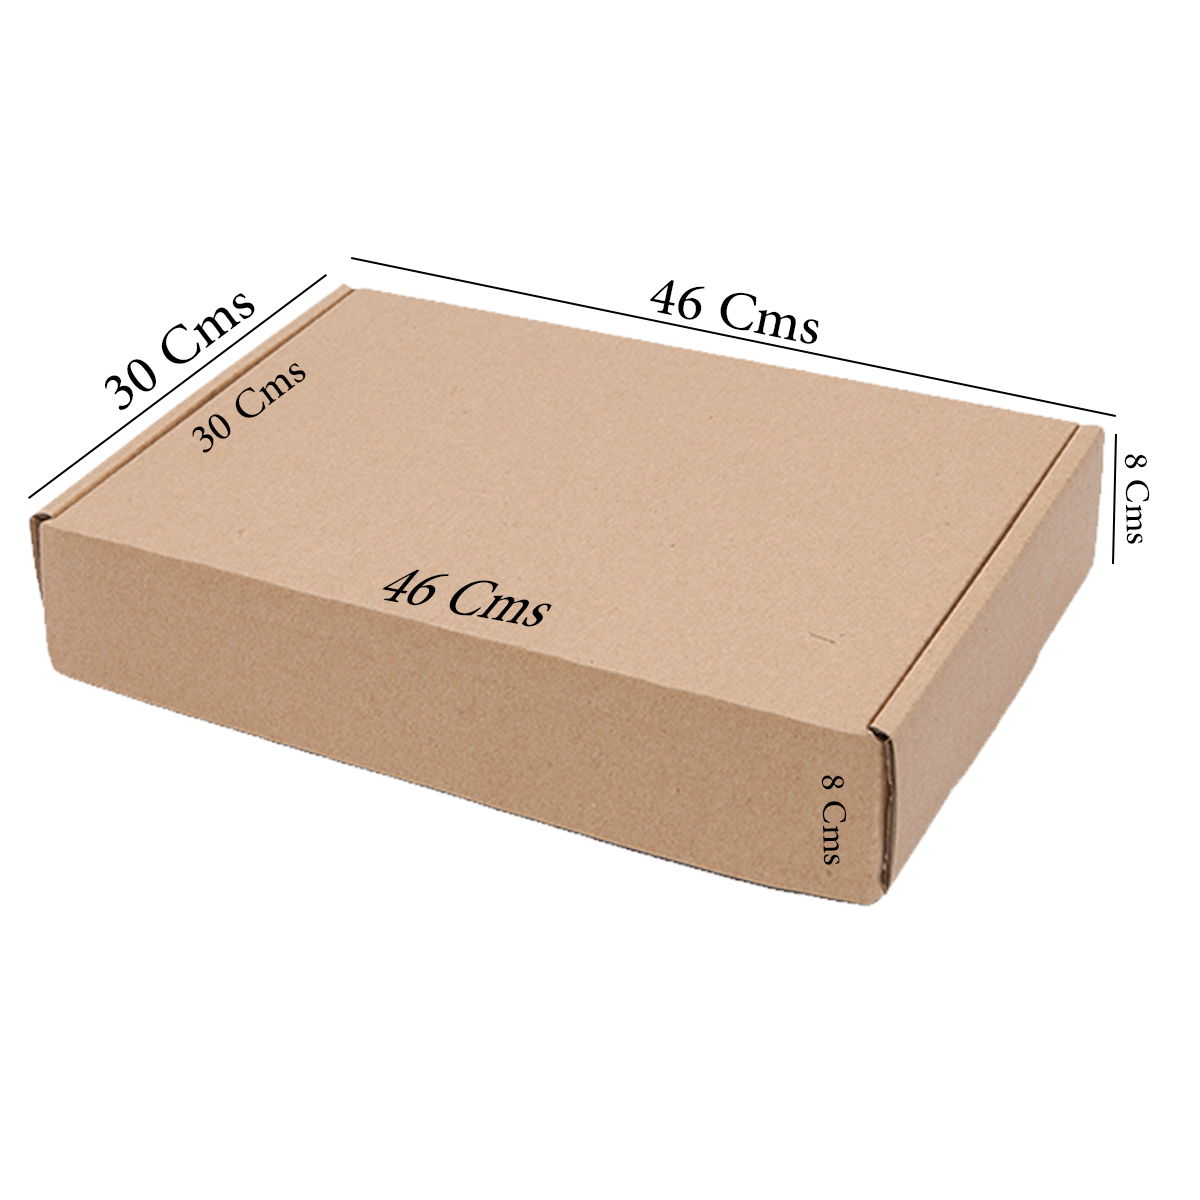 Extra Large Brown Kraft Mailing Boxes 46 x 30 x 8 Cm (10Pc Pack)